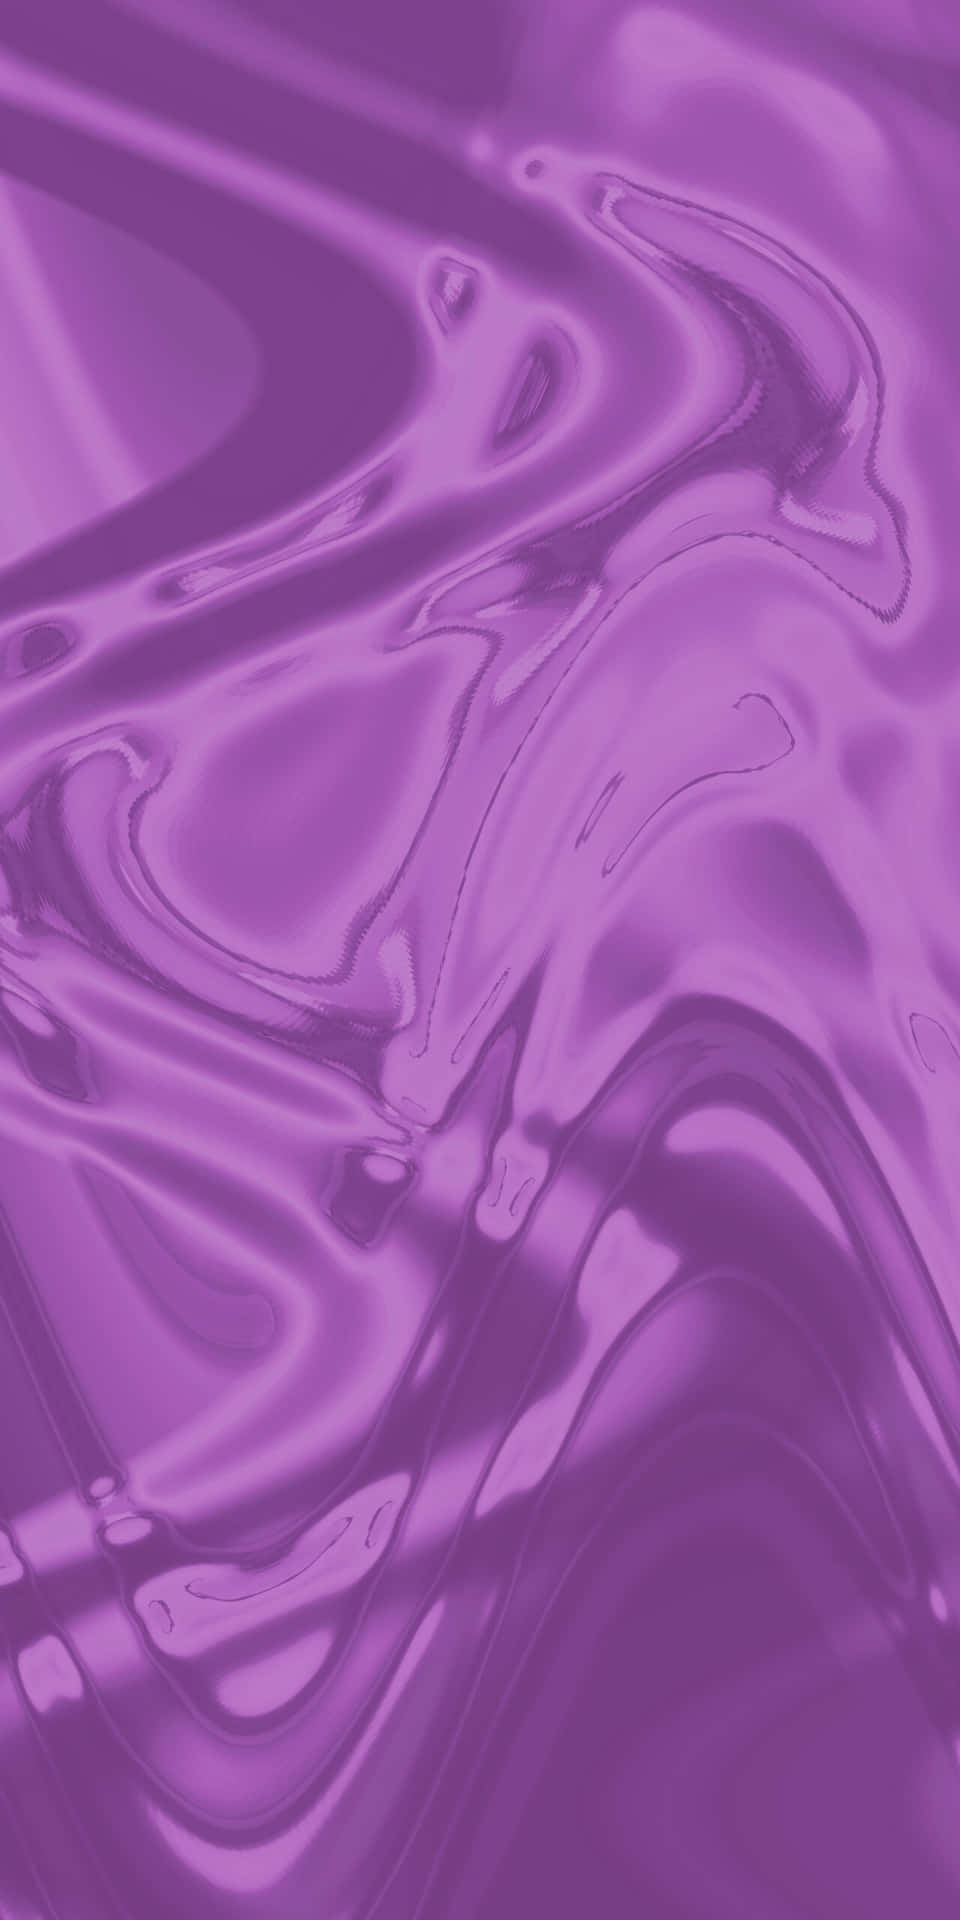 Make your phone's background beautiful with this vibrant Mauve pattern.